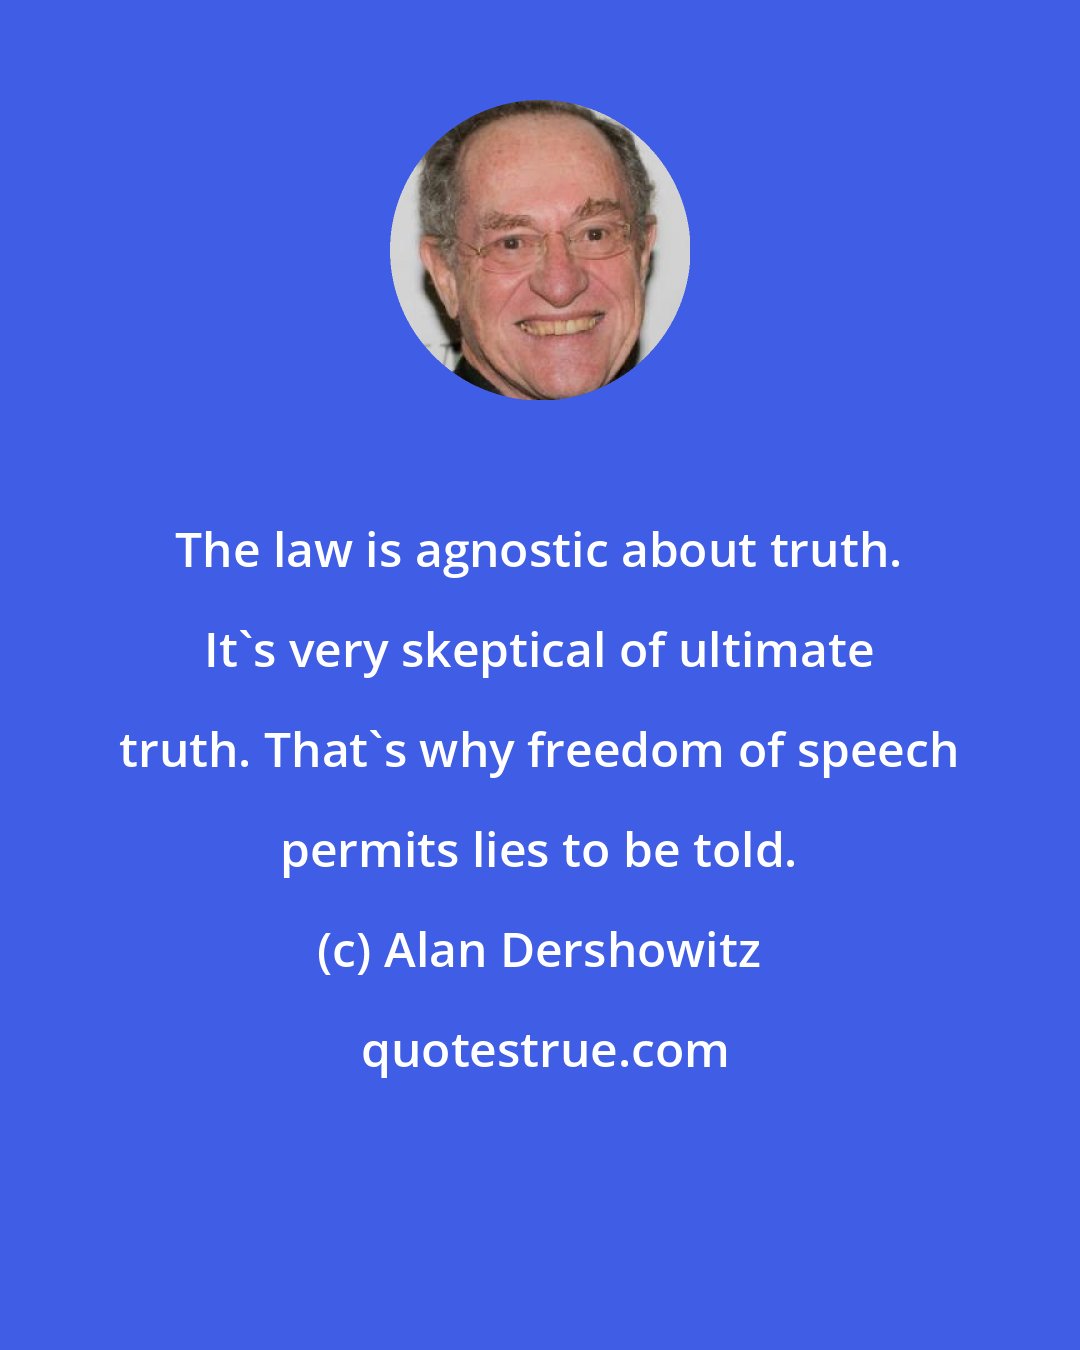 Alan Dershowitz: The law is agnostic about truth. It's very skeptical of ultimate truth. That's why freedom of speech permits lies to be told.